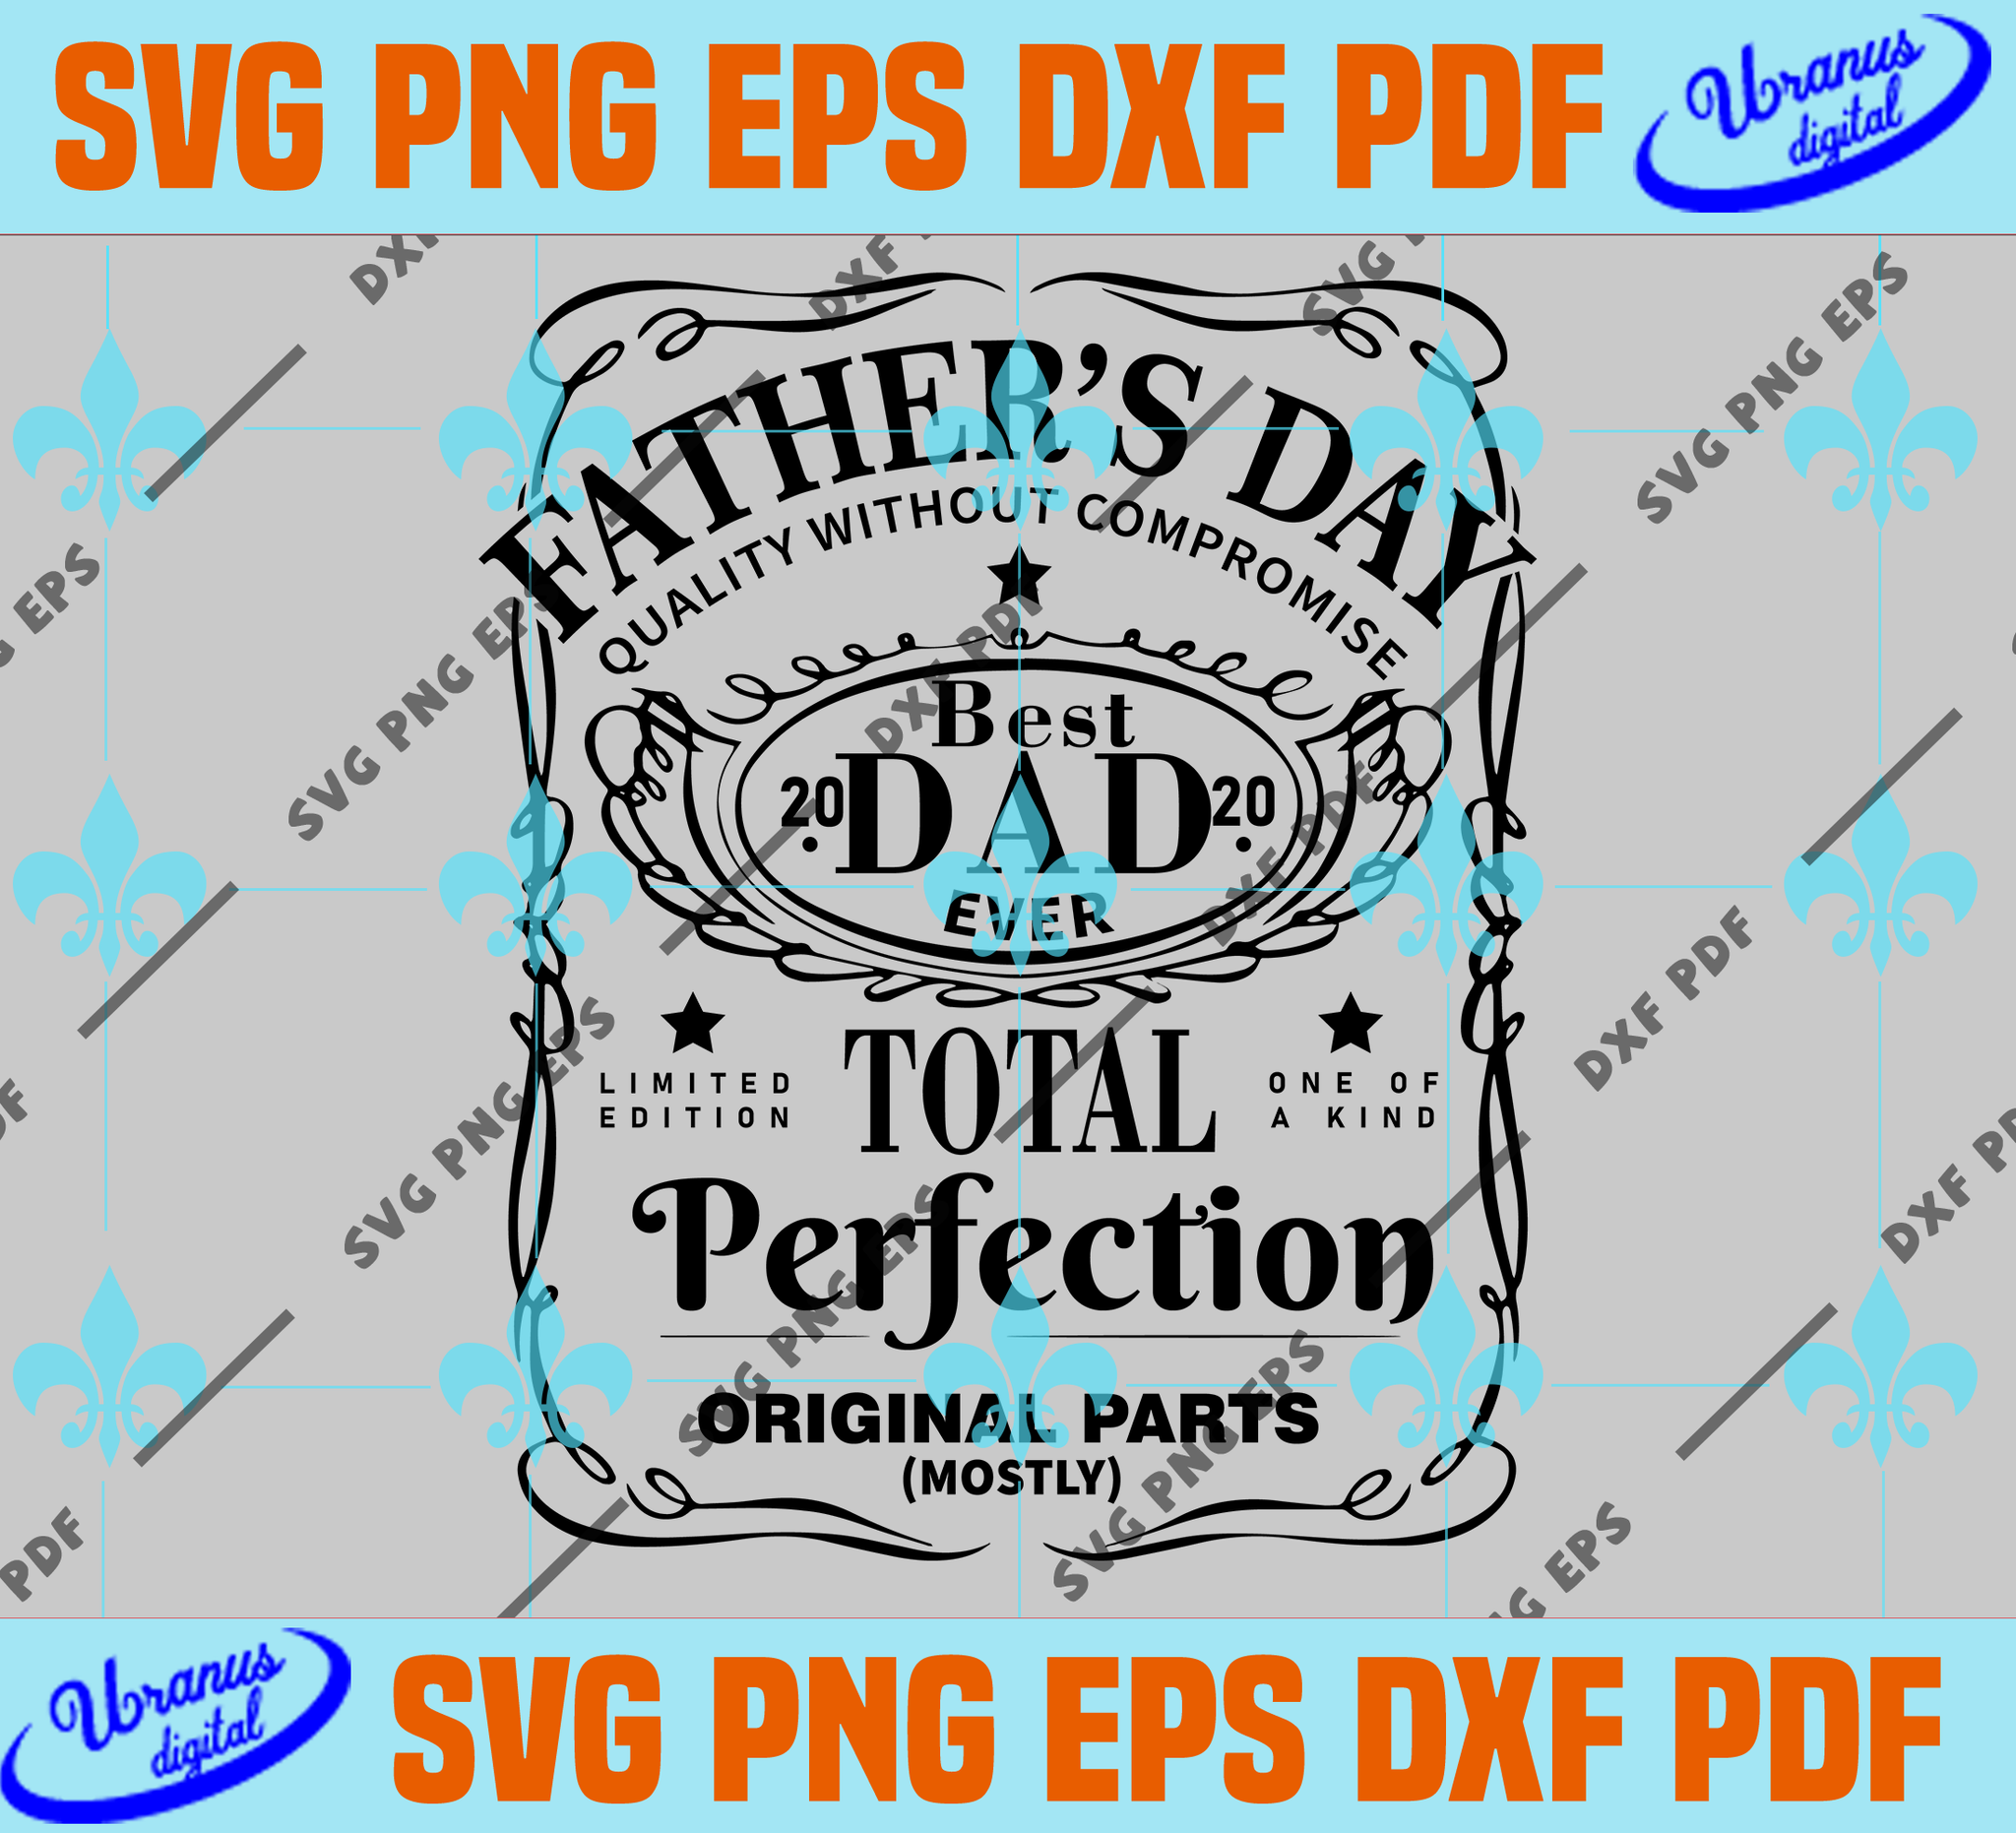 Download Best Dad Ever 2020 Svg Happy Father S Day Svg Father S Day Gift Total Uranusdigital